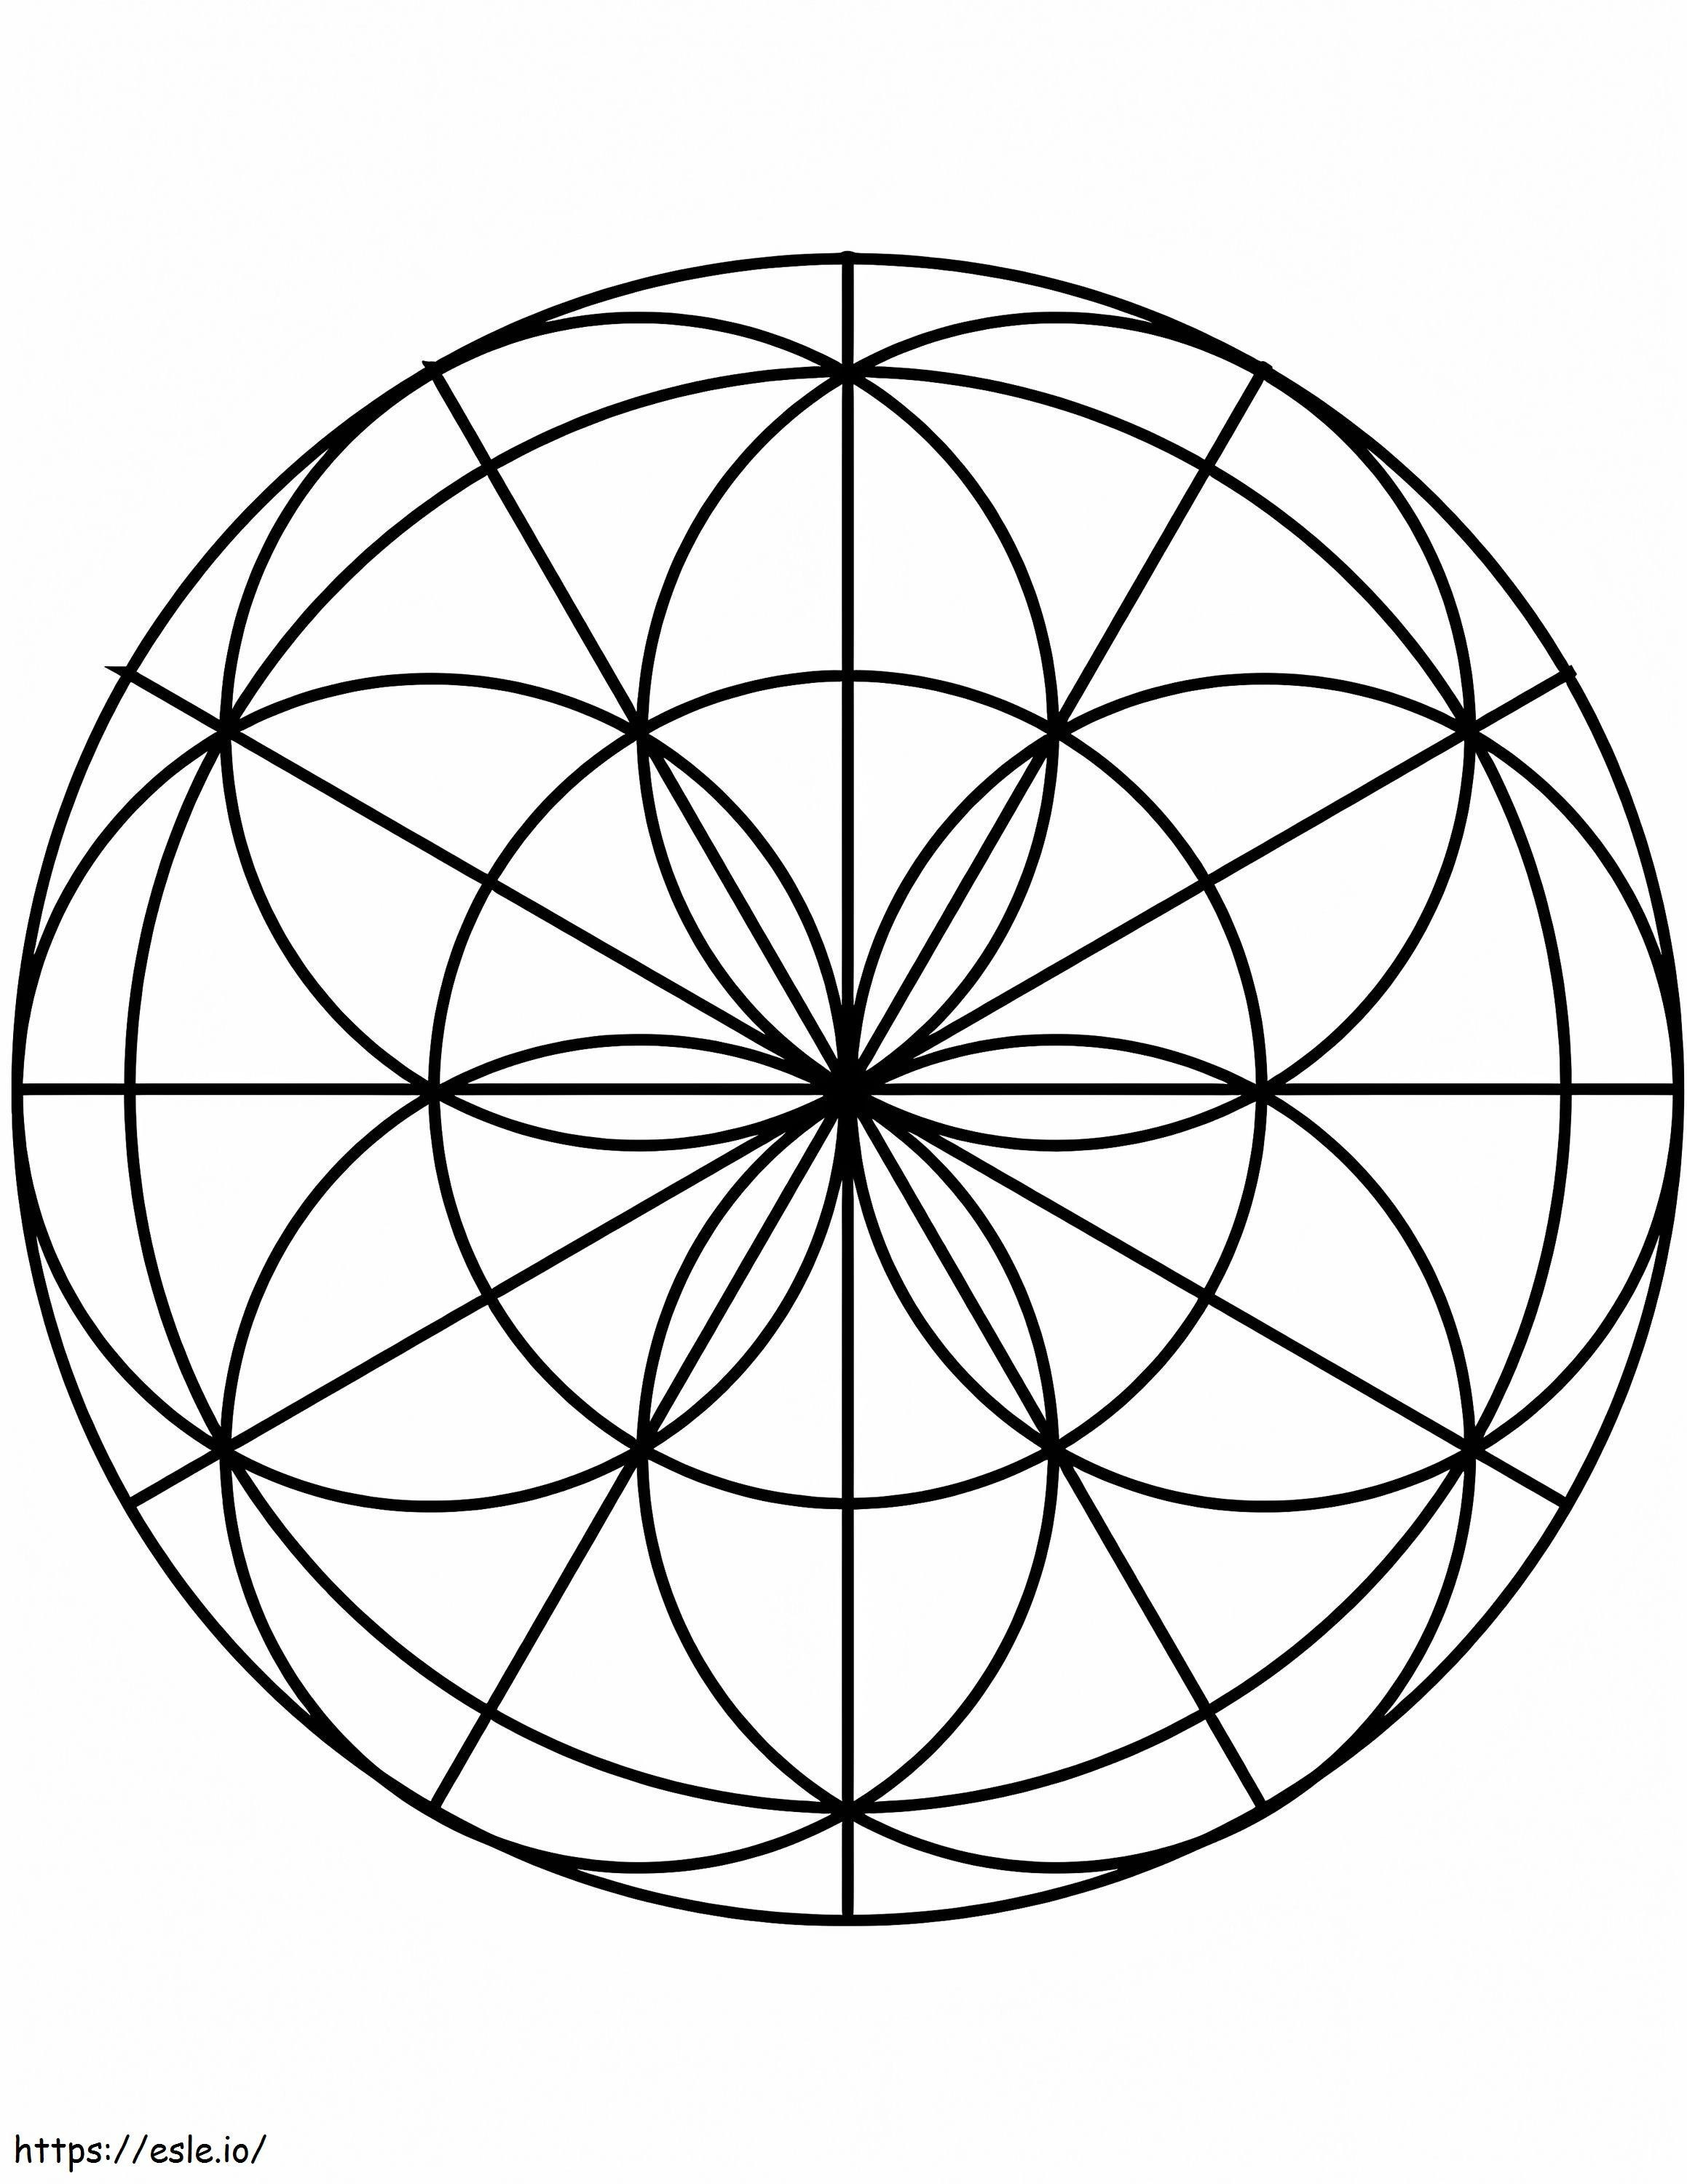 Flower Of Life Mandala coloring page